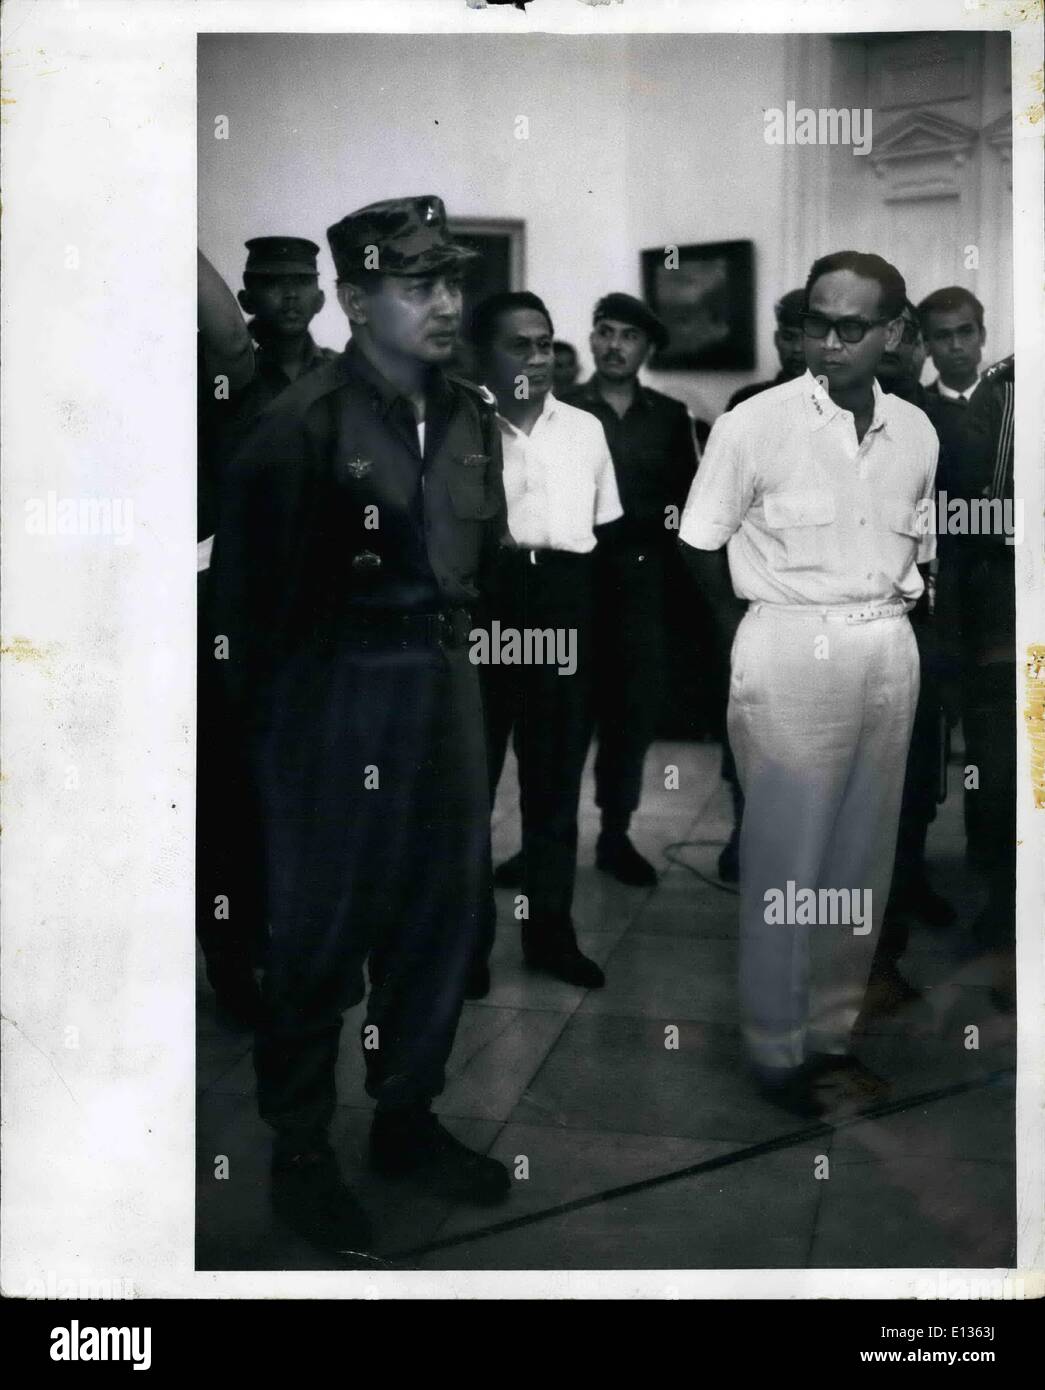 Feb. 28, 2012 - Maj. Gen Suharto (left in army uniform) at Istana Palace, Djakarta Indonesia, Oct. 14, 1965 when President Sukarno appointed him Army Chief of Staff. Suharto replaces Lt. gen Achmad yani, who was killed by the communists during the Oct. 1 aborted coup. In white, at right, is Dr. Subandario, 1st Deputy, Minister. An historic picture showing the two antagonists together (may be for the last time) with Suhato showing calm and resolution, while Subandario shows distrust and insecurity. Stock Photo